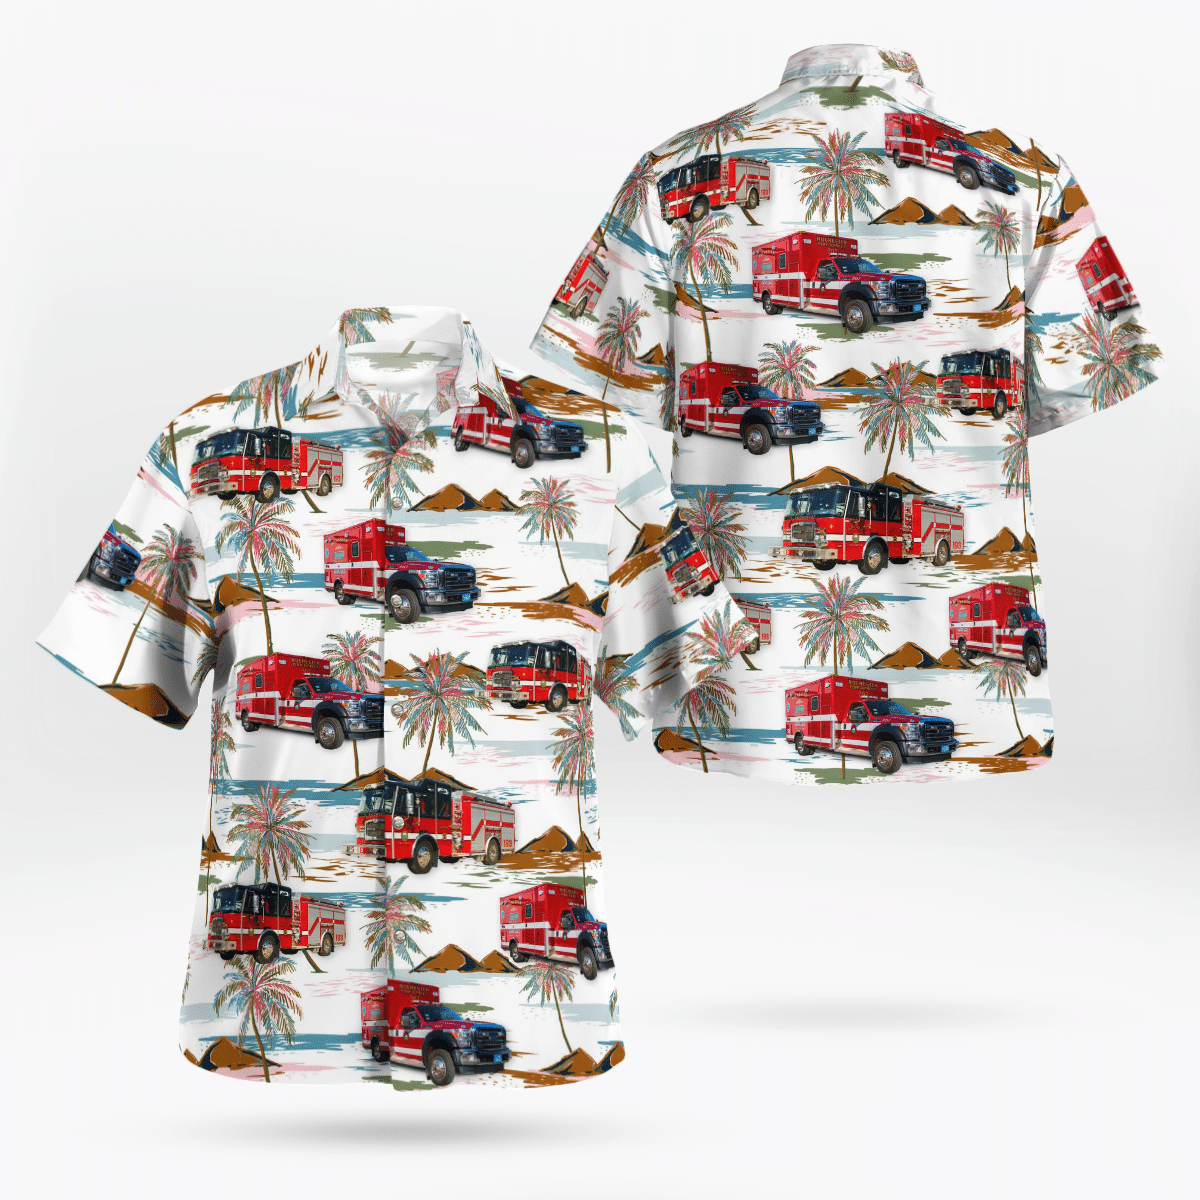 If you are in need of a new summertime look, pick up this Hawaiian shirt 210